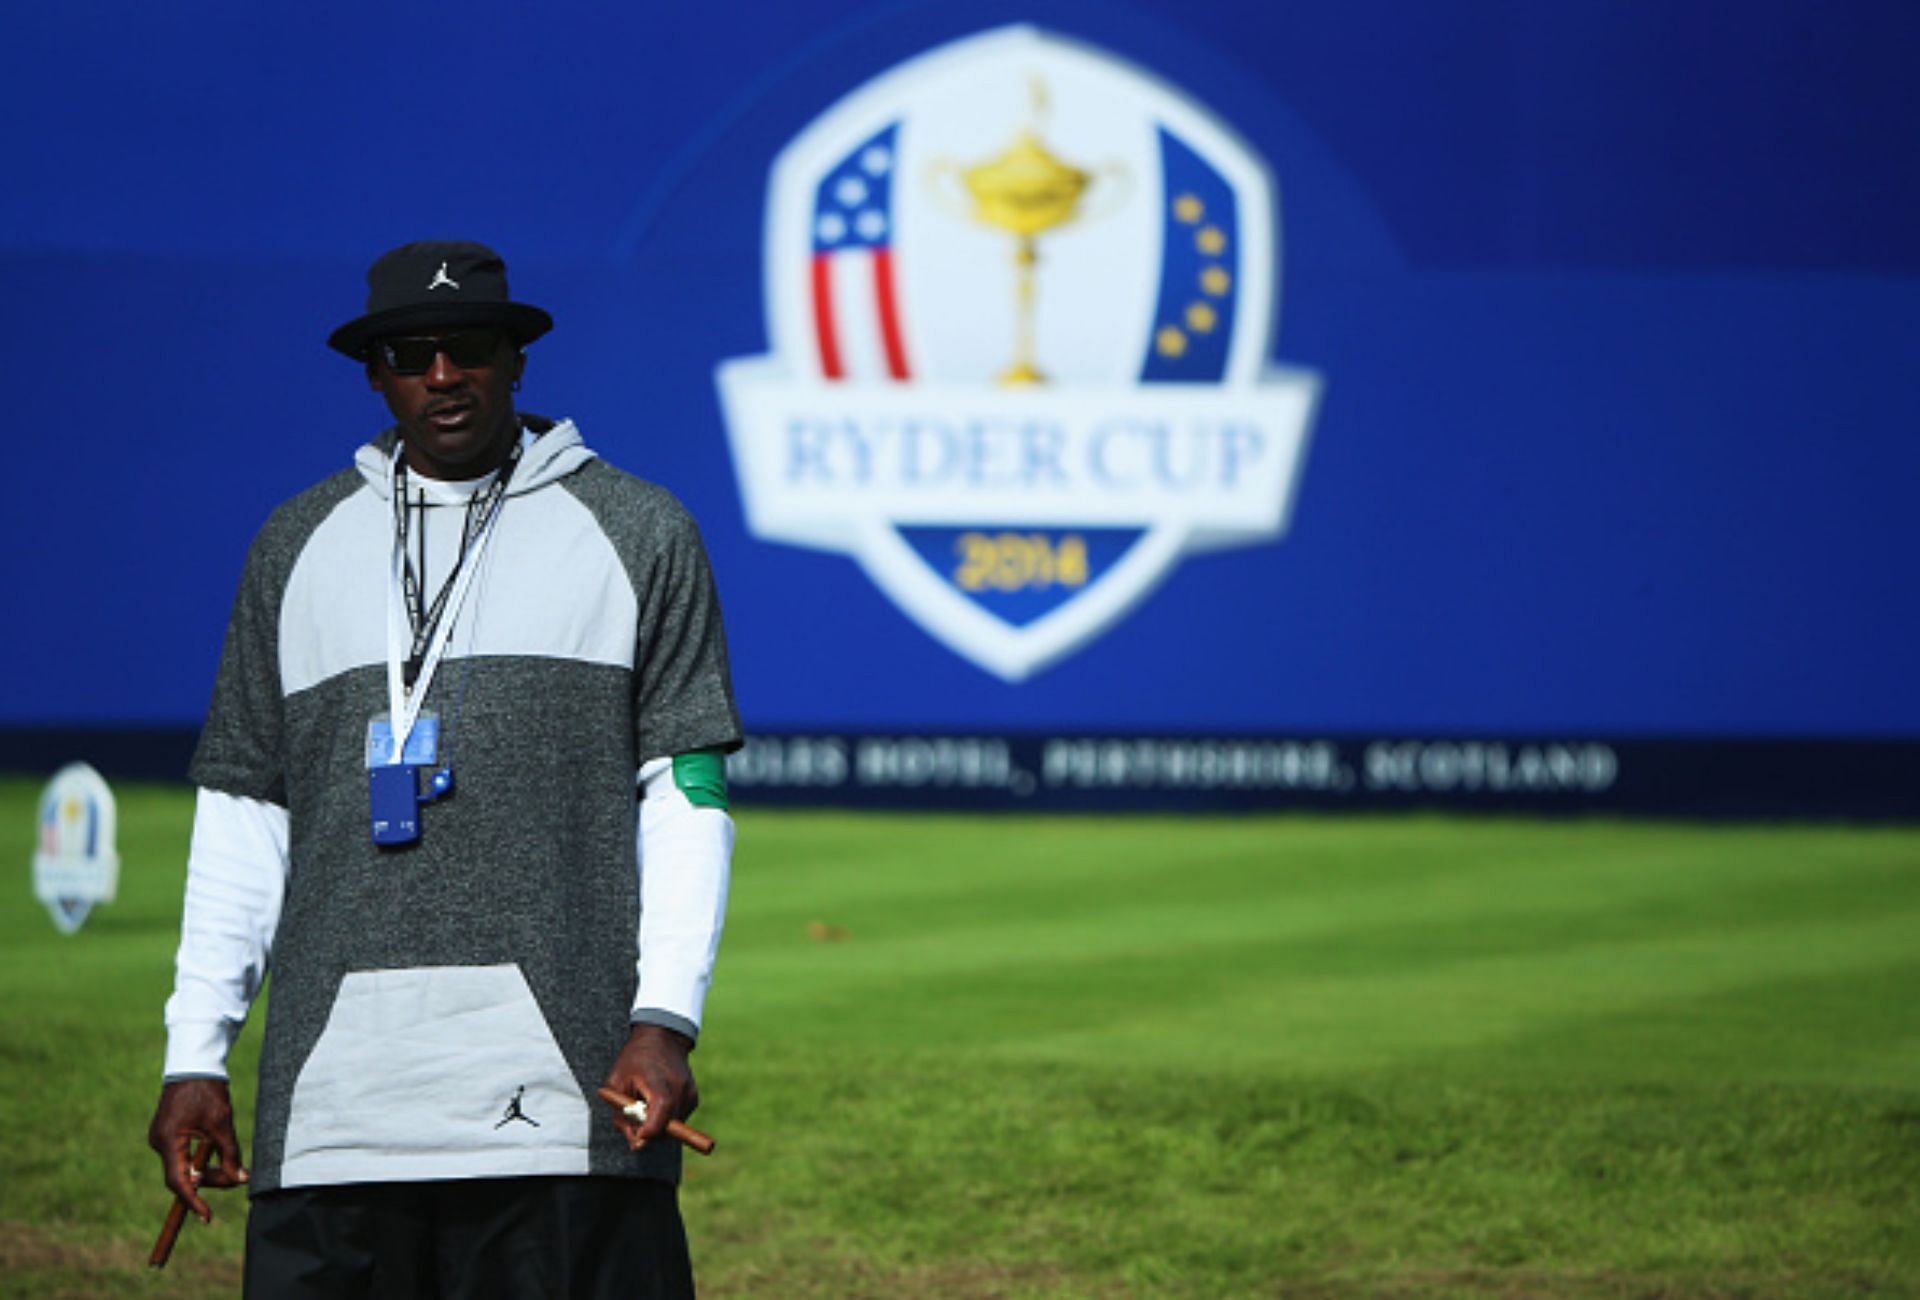 Michael Jordan visiting the course of the 2014 Ryder Cup (Image via Getty).